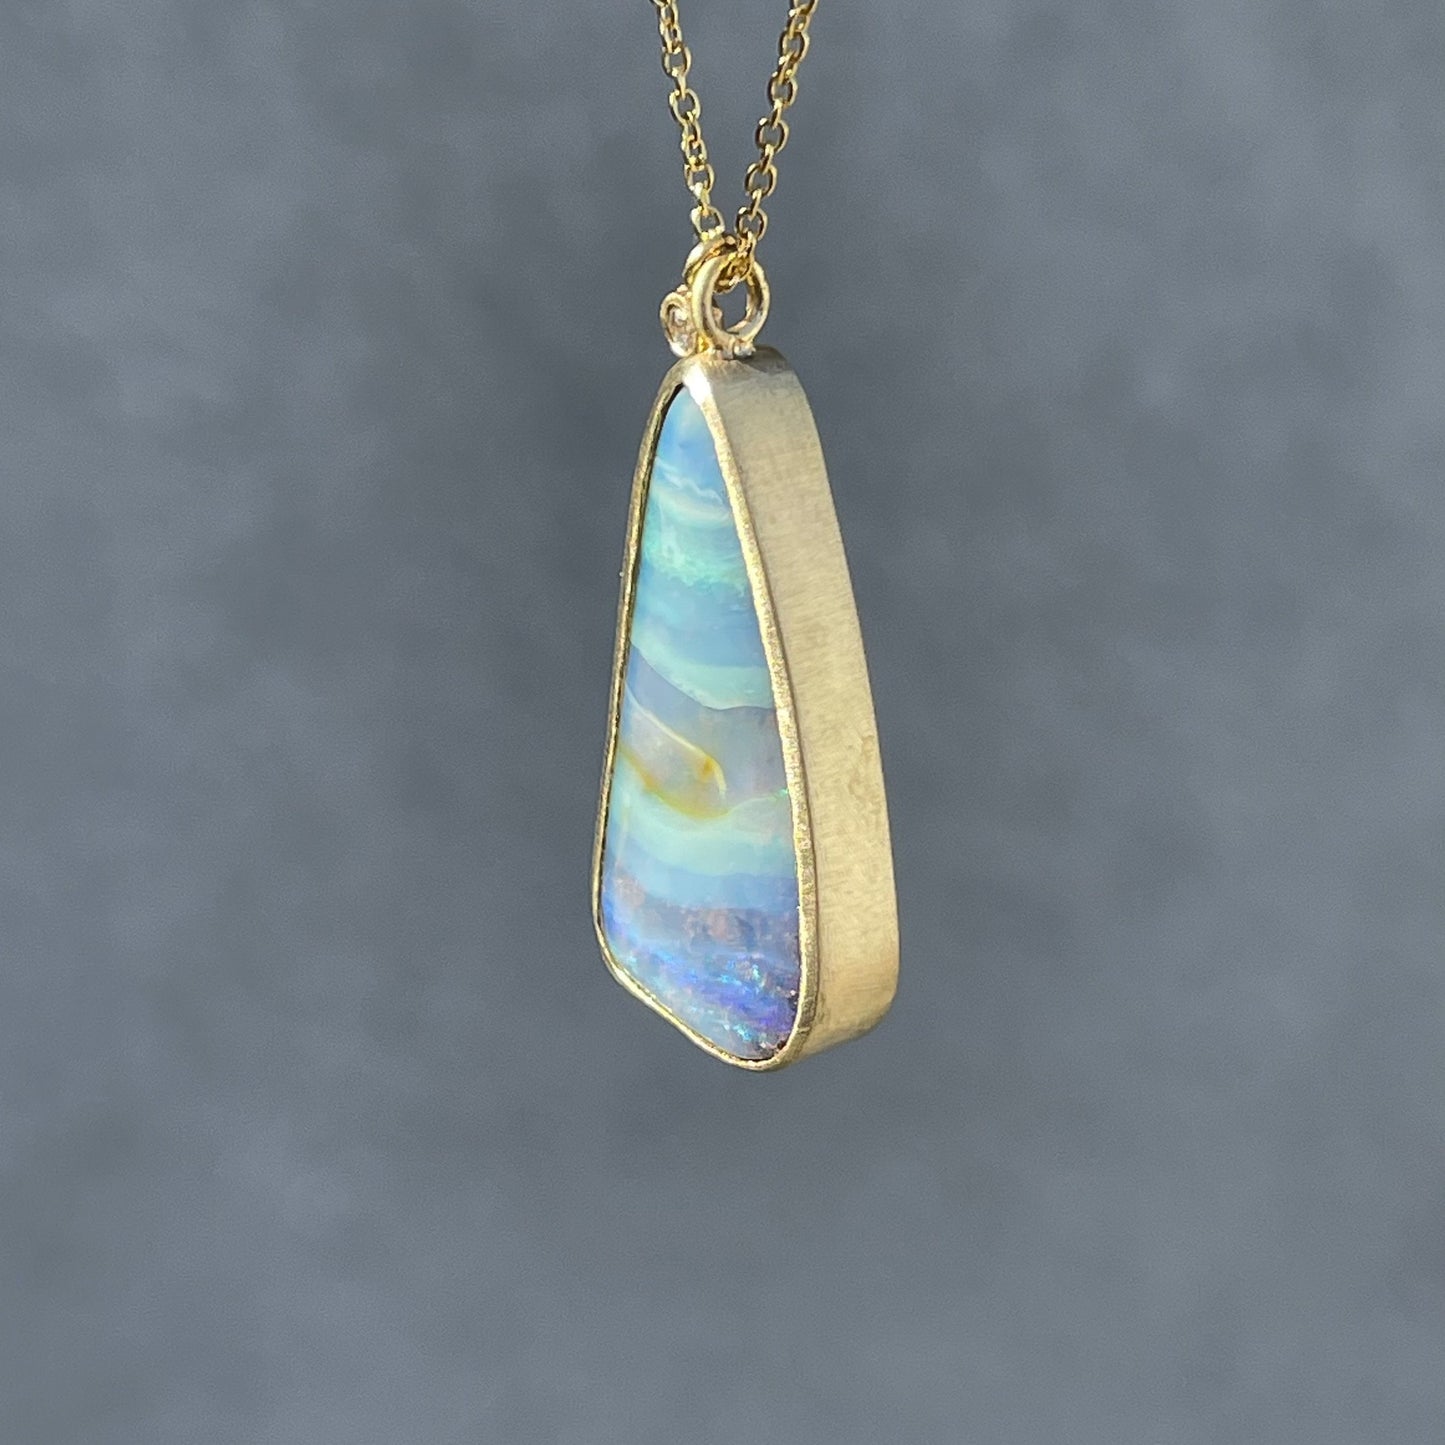 Opal pendant with boulder opal by NIXIN Jewelry hanging in sunlight